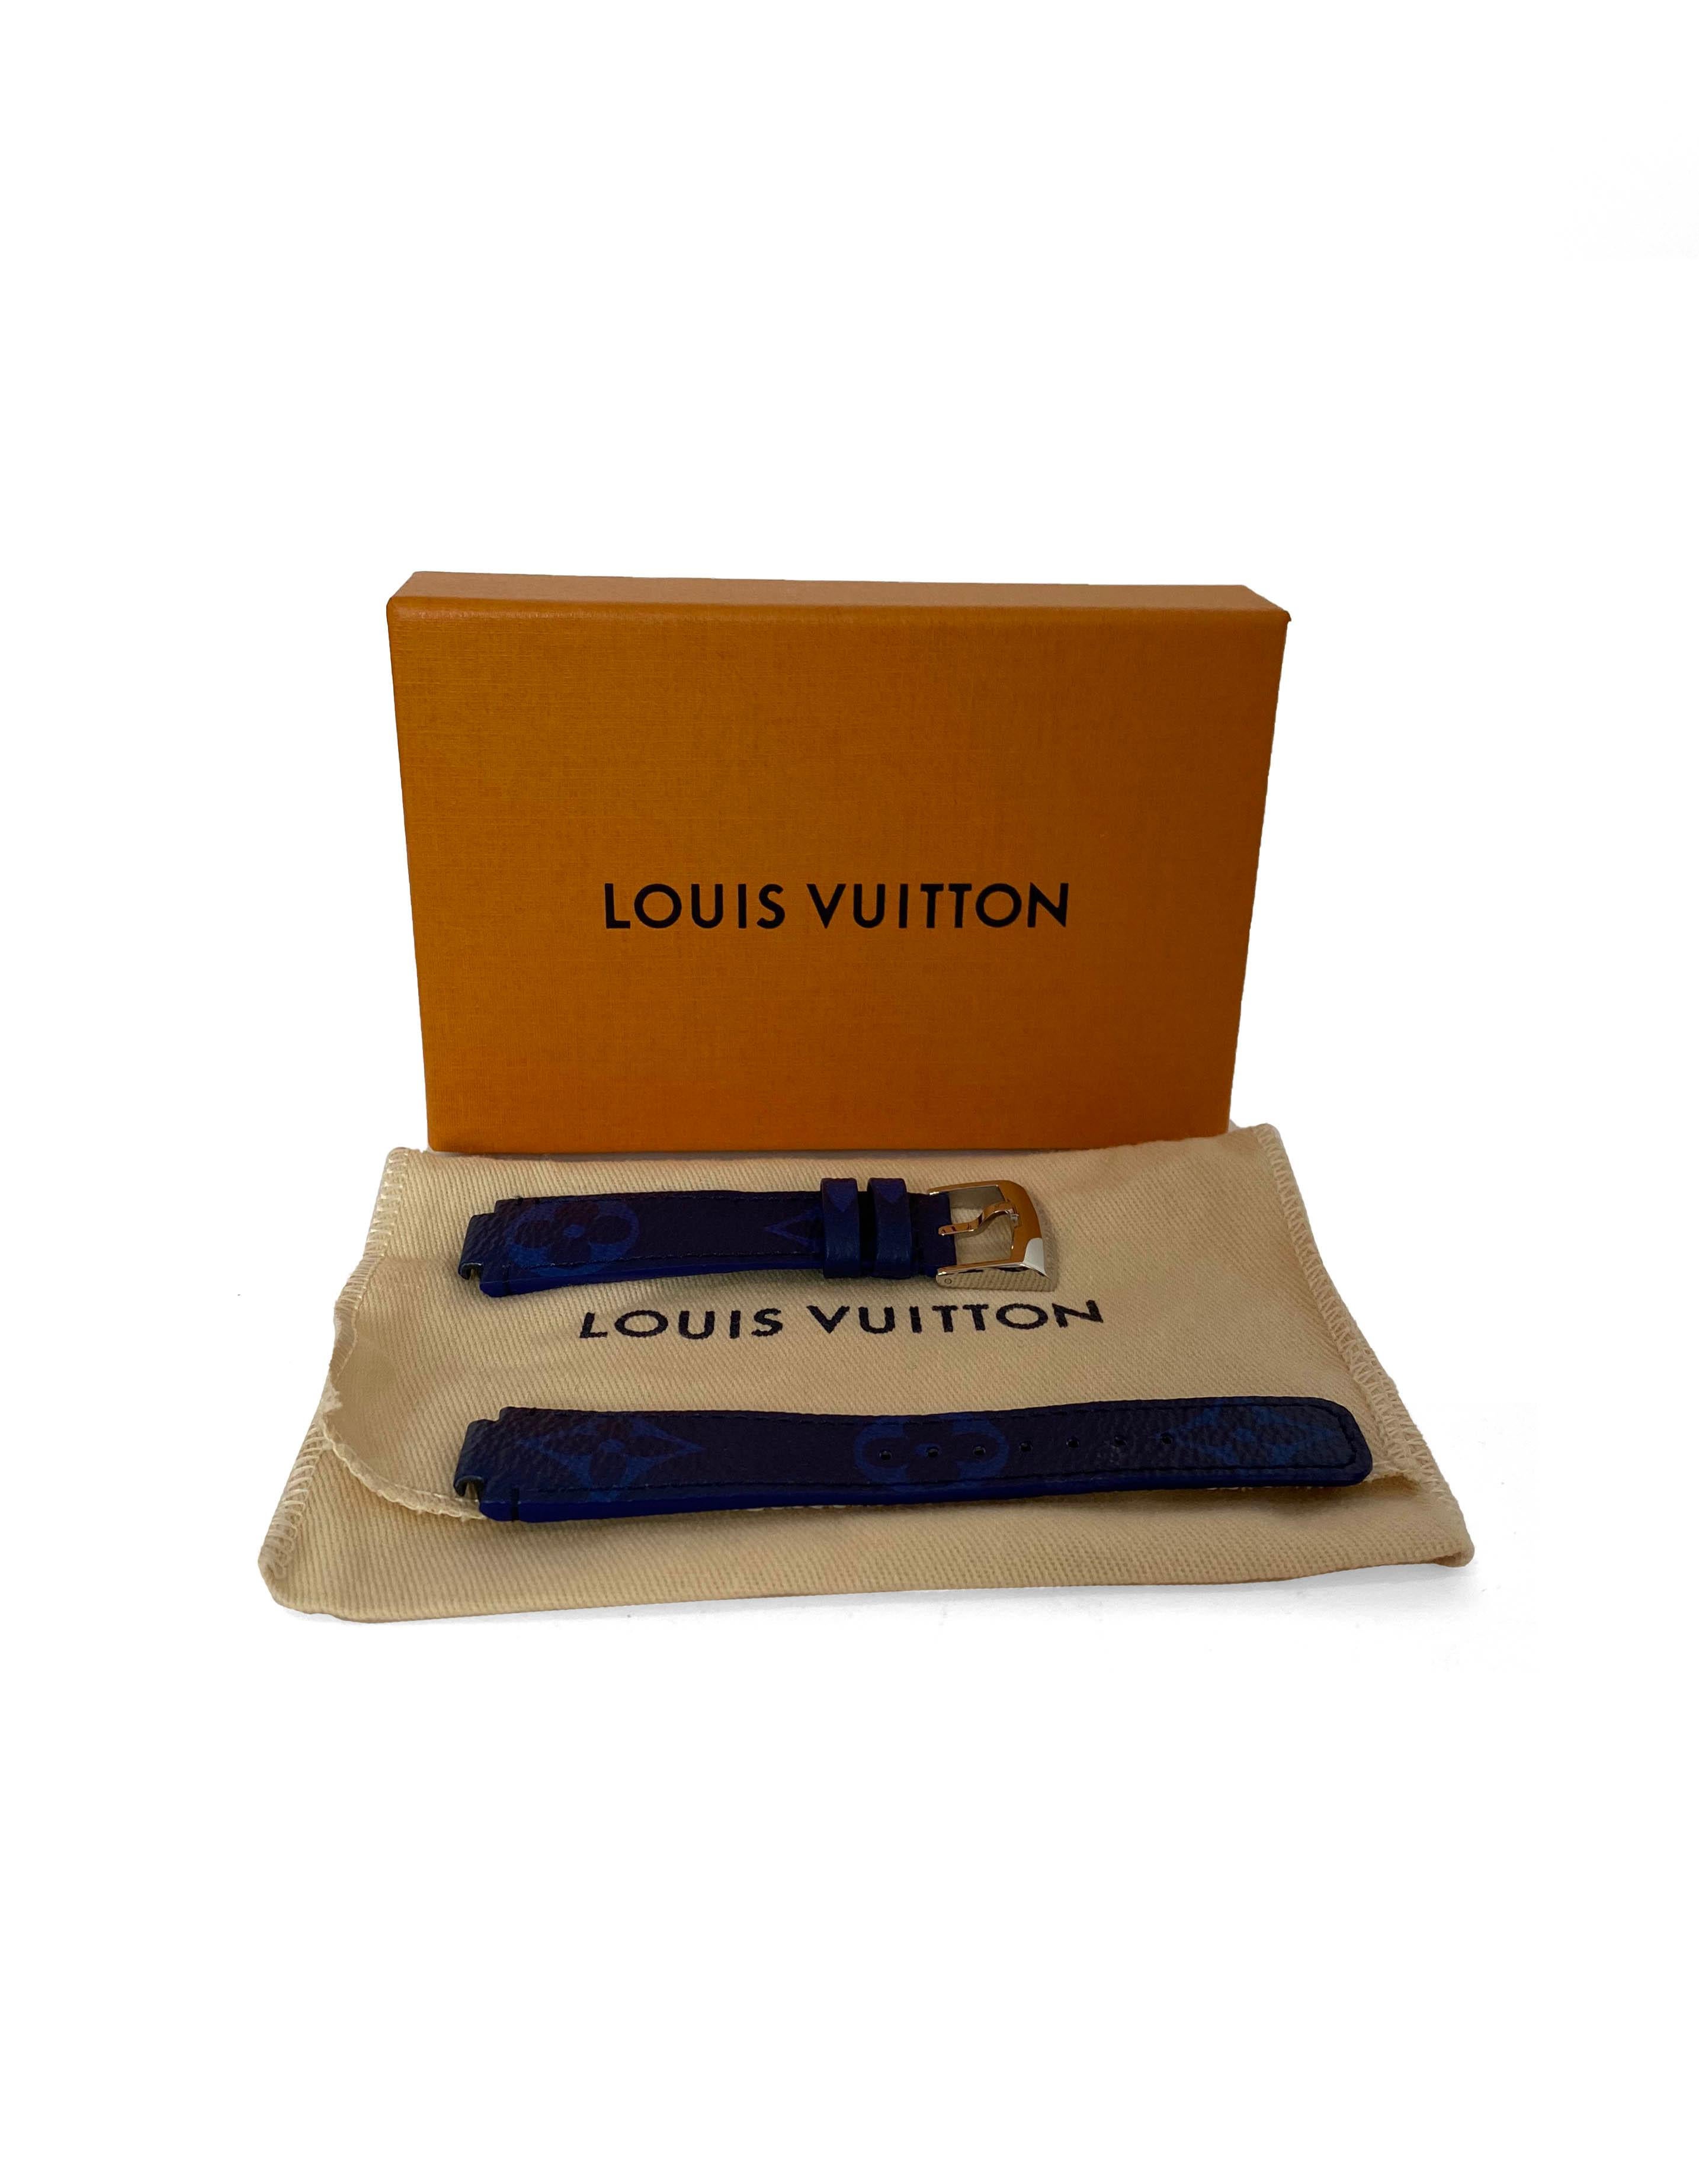 Louis Vuitton Monogram Cobalt Blue Watch Strap.  Watch strap for LV Tambour 39.

Made In: France
Color: Blue, black, silver
Materials: Coated canvas and leather
Model Name: Compatible with Tambour 39 watch
Retail Price: $405 plus tax
Overall